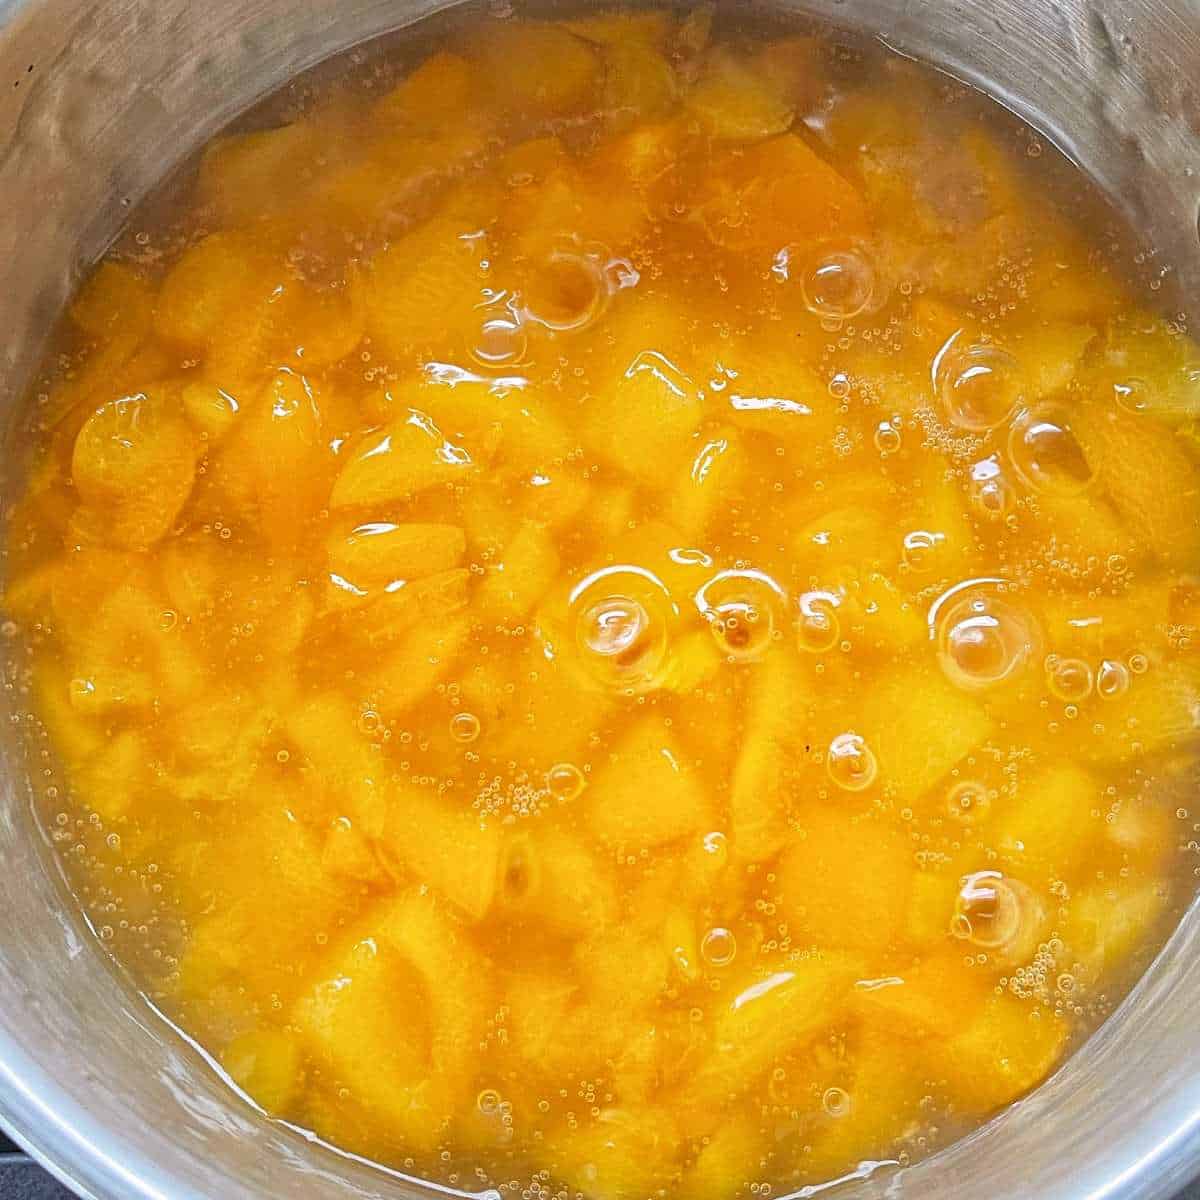 The diced apricots in a small saucepan.